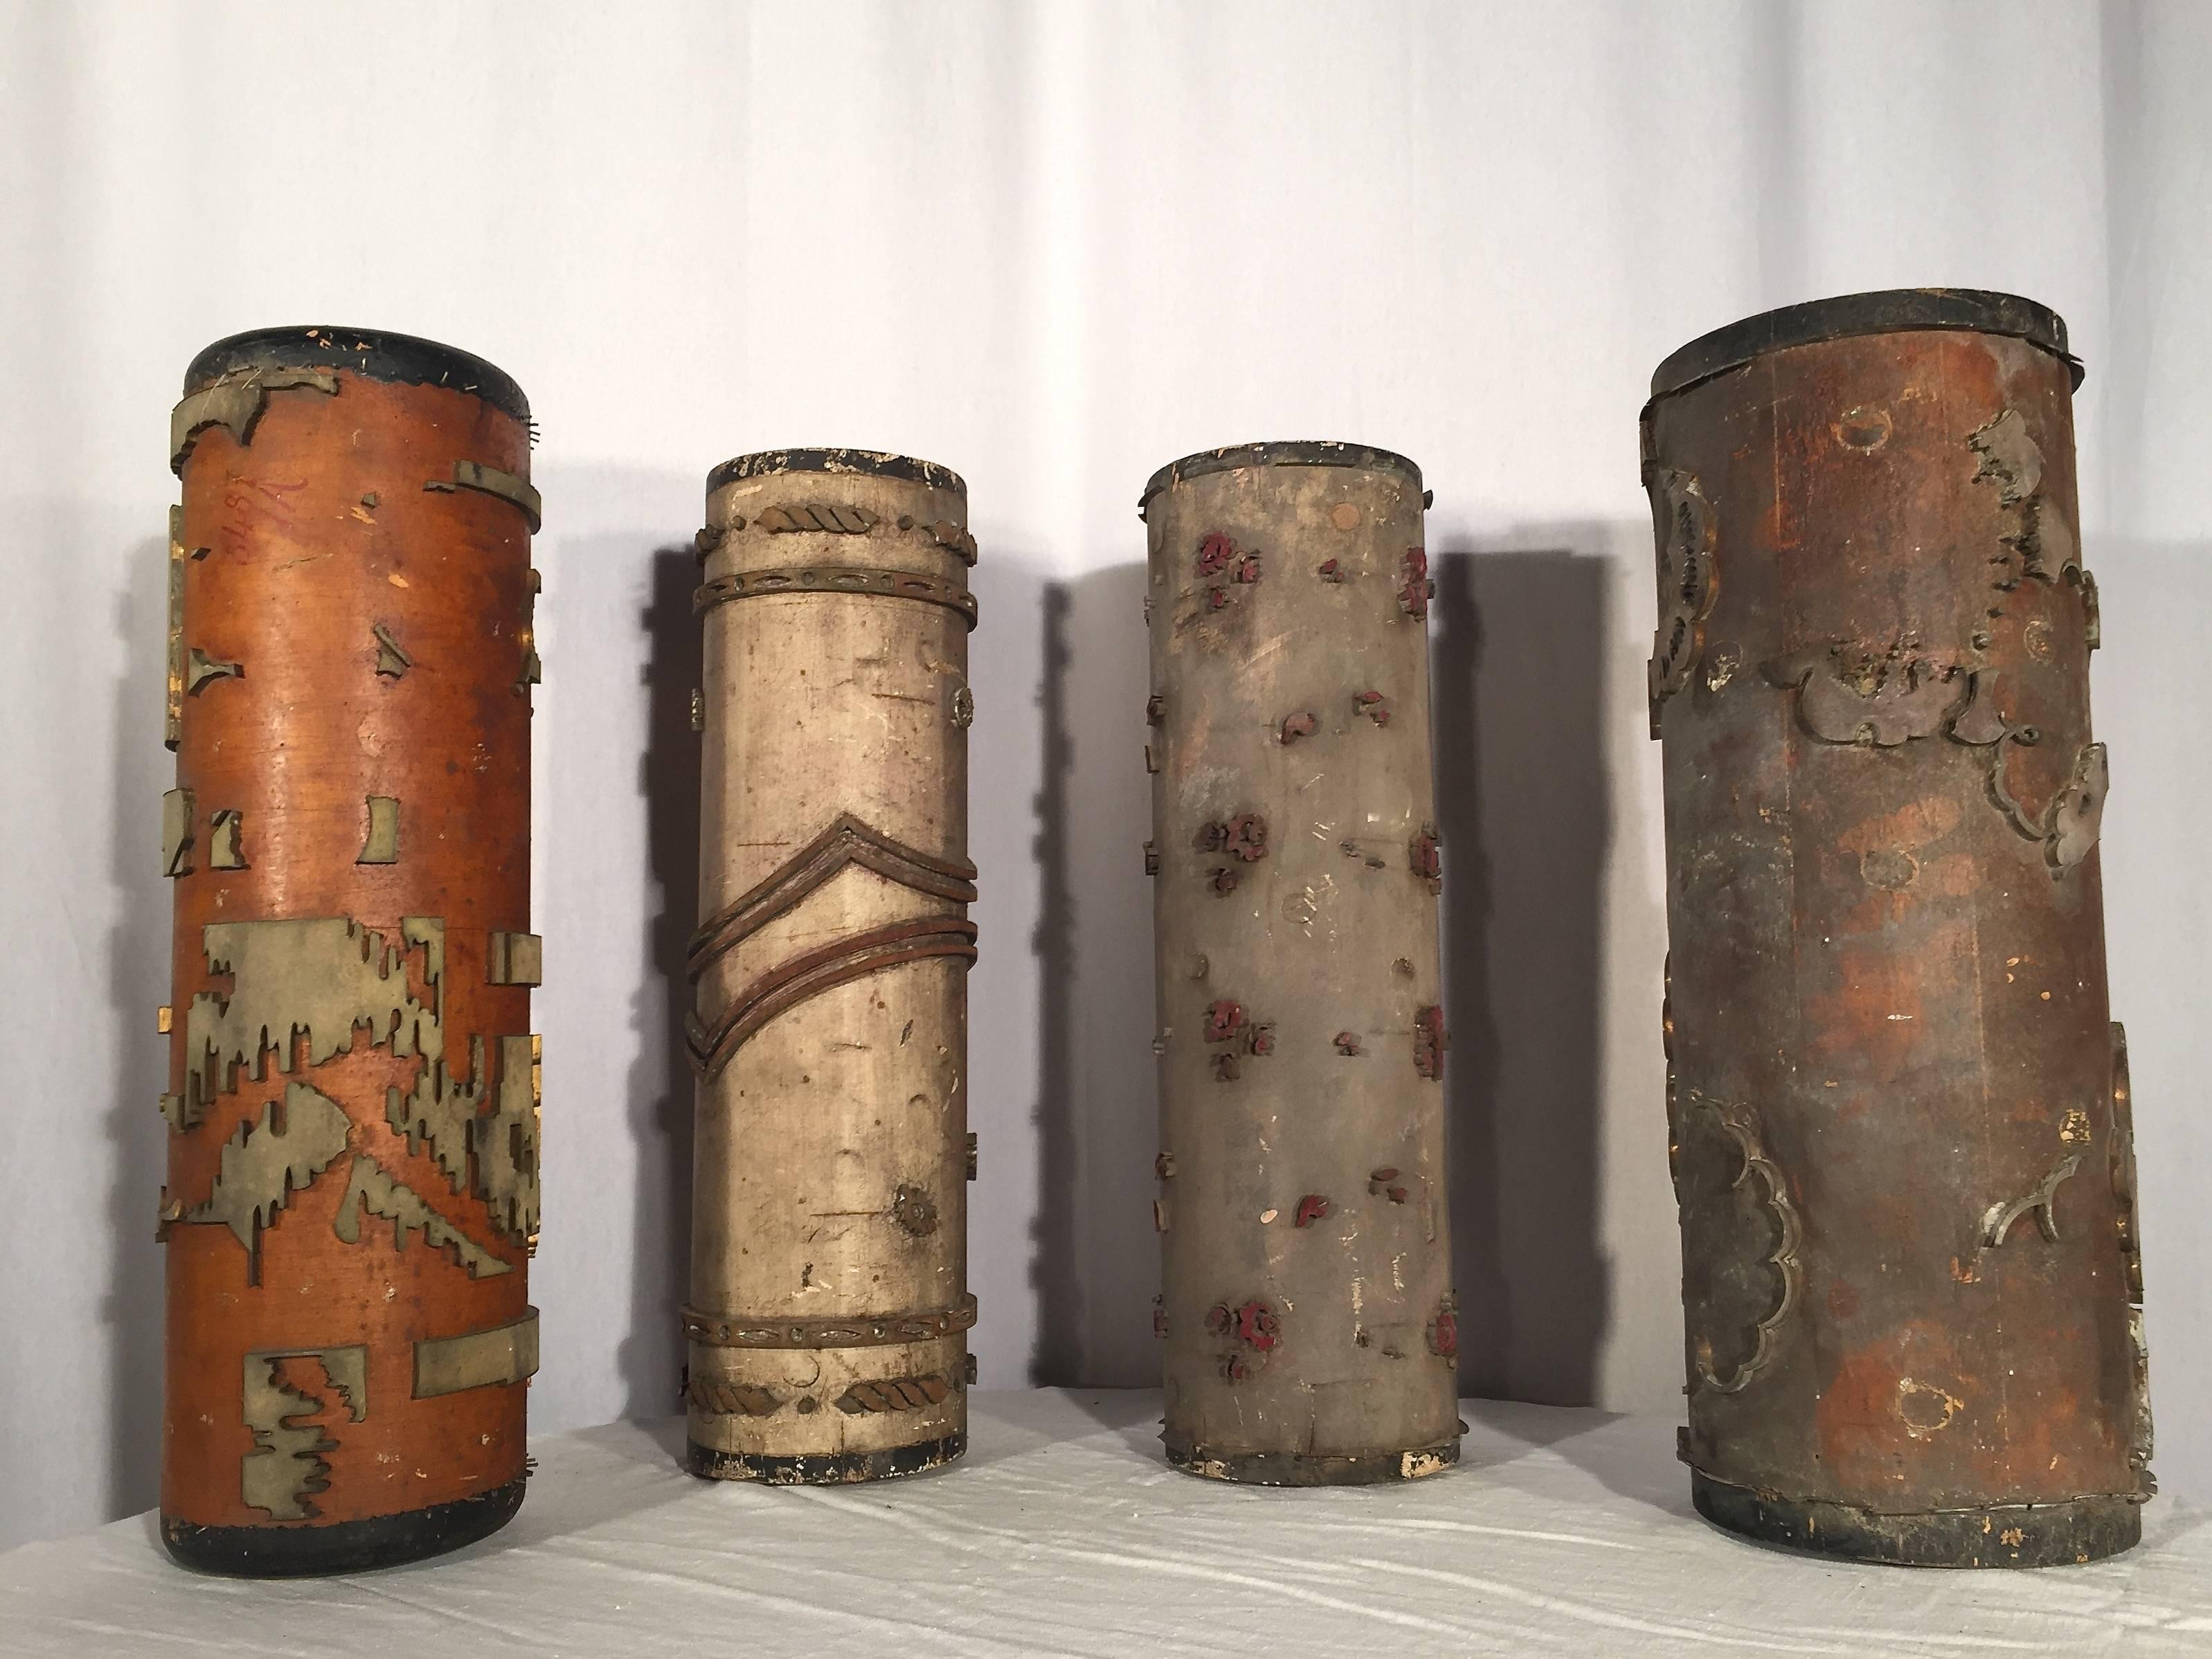 When wallpaper is printed by hand, separate rollers are made to each imprint a different color on the background. These vintage rollers from the 1930s are truly unusual and would make great lamps or sculptural elements on a mantlepiece or table.